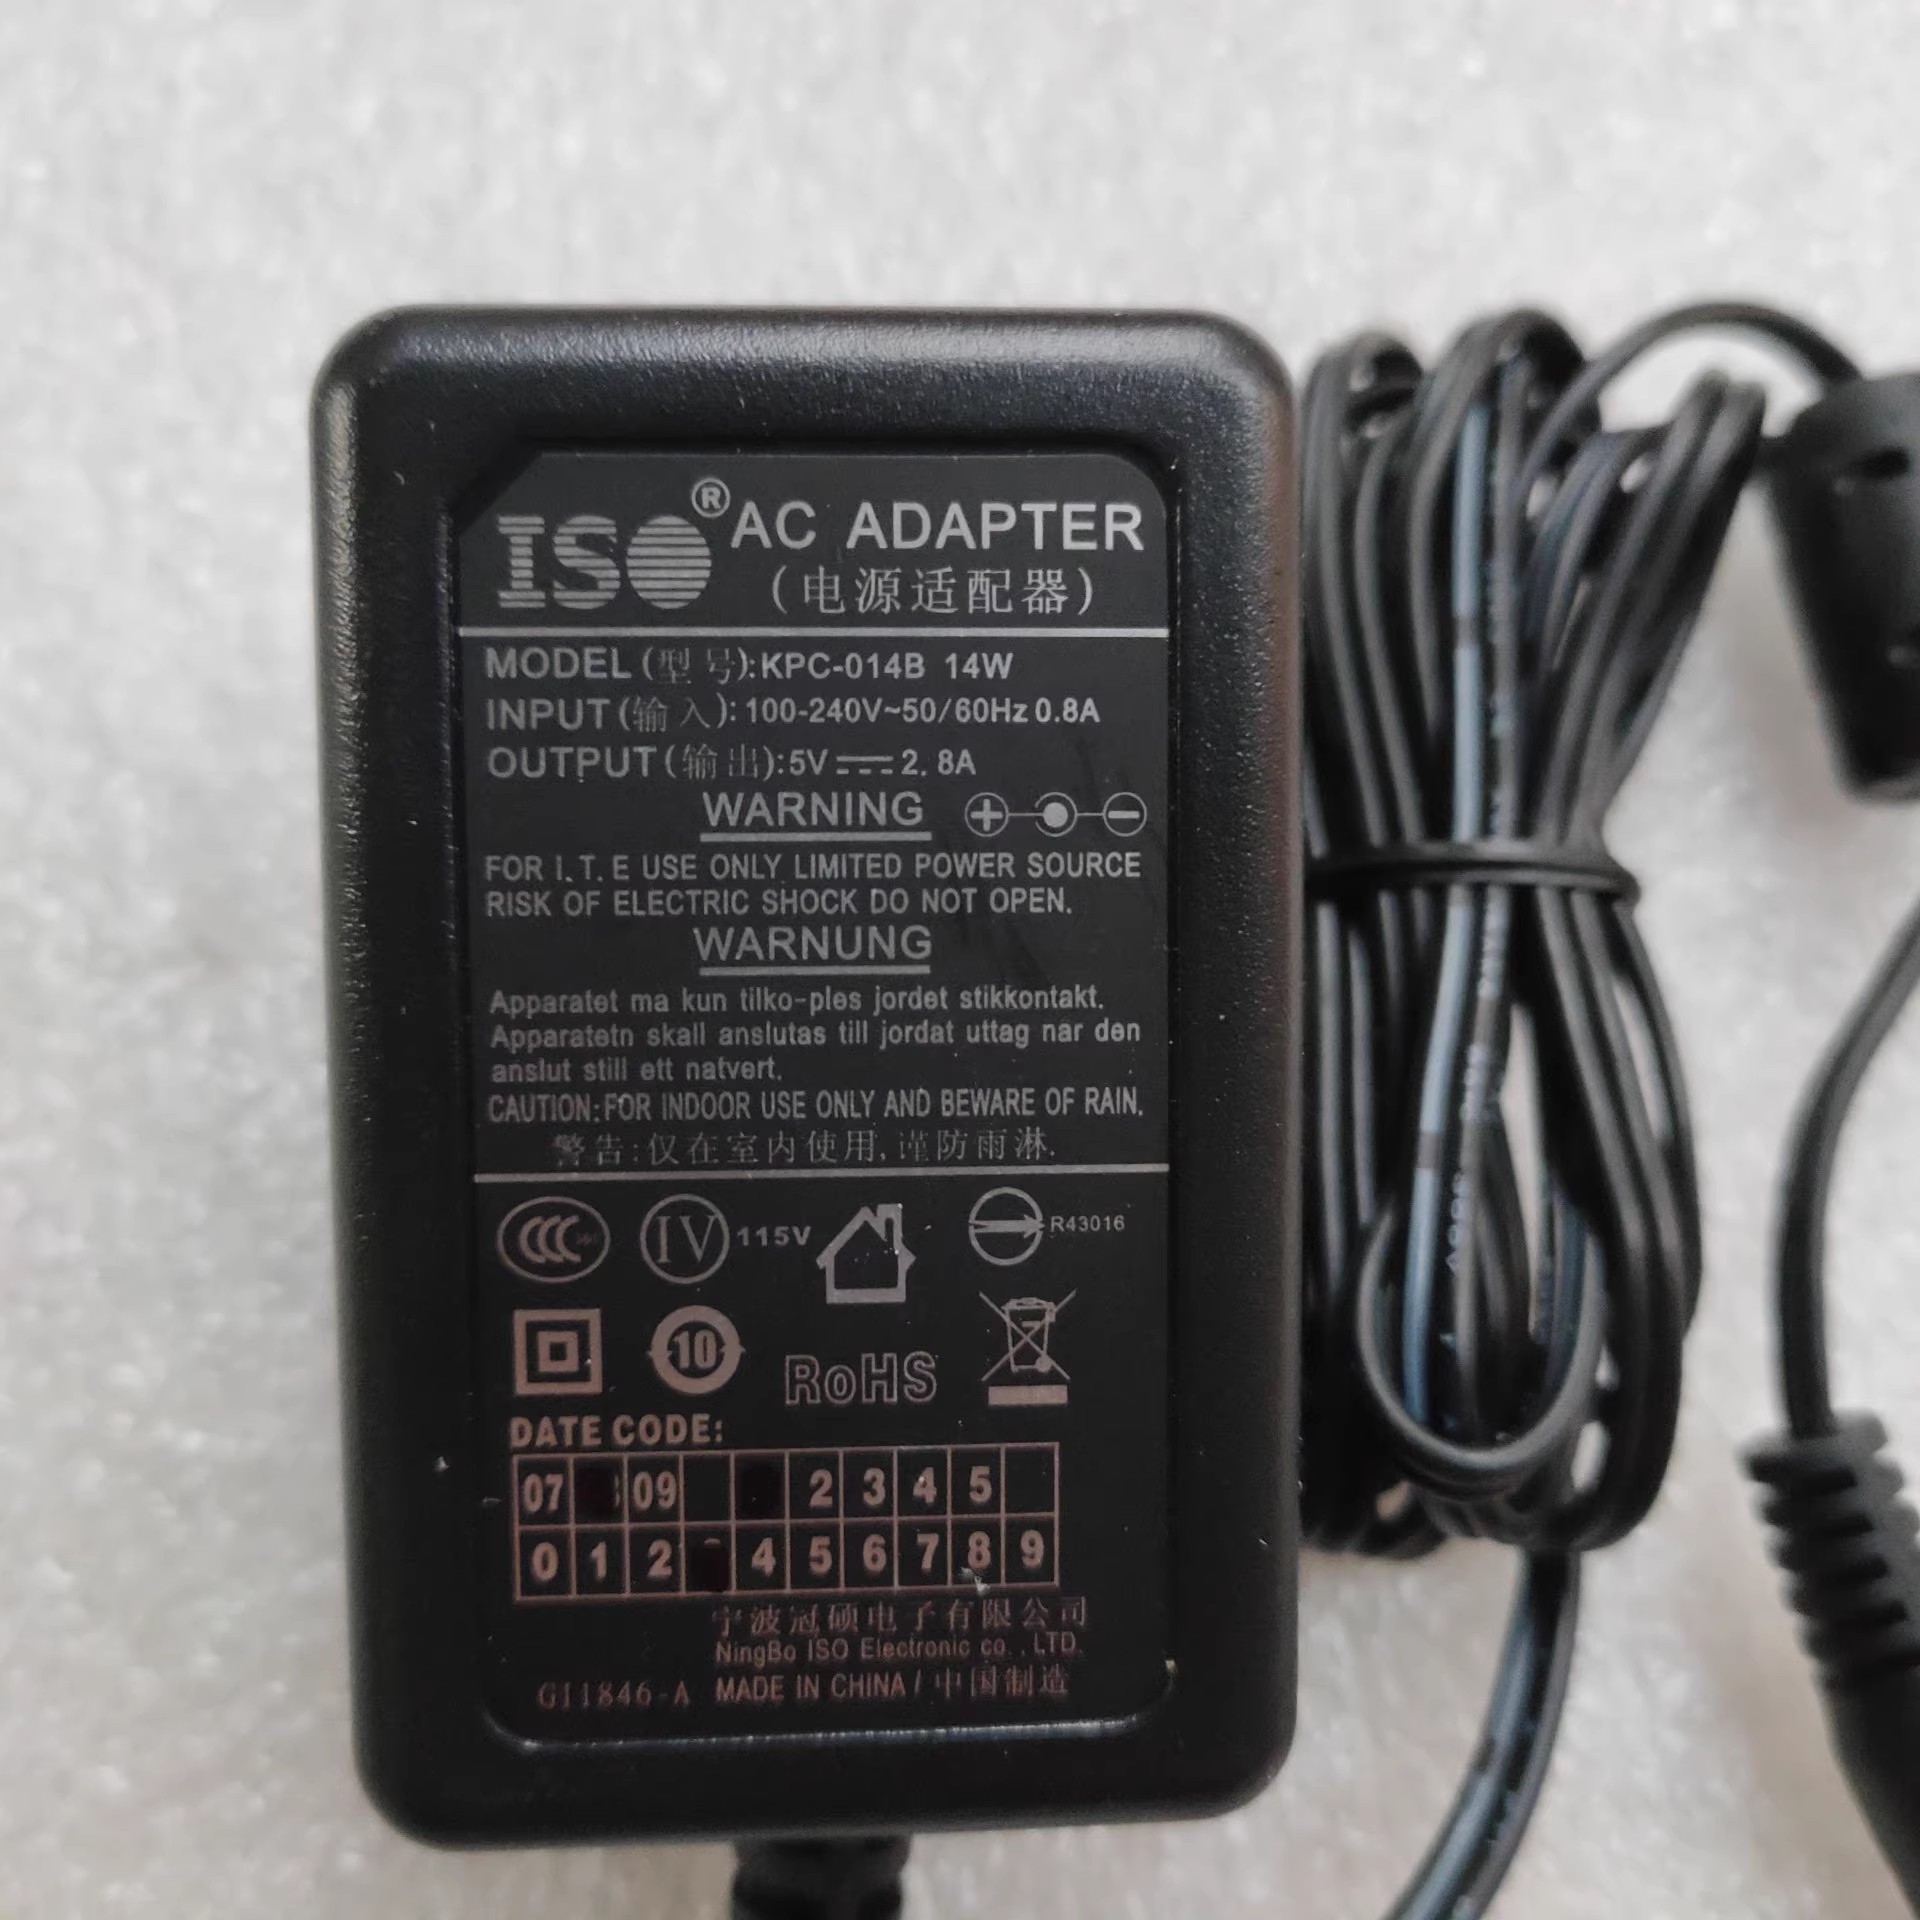 *Brand NEW* 5.5*2.1MM 5V 2.8A AC DC ADAPTHE KPC-014B ISO 14W POWER Supply